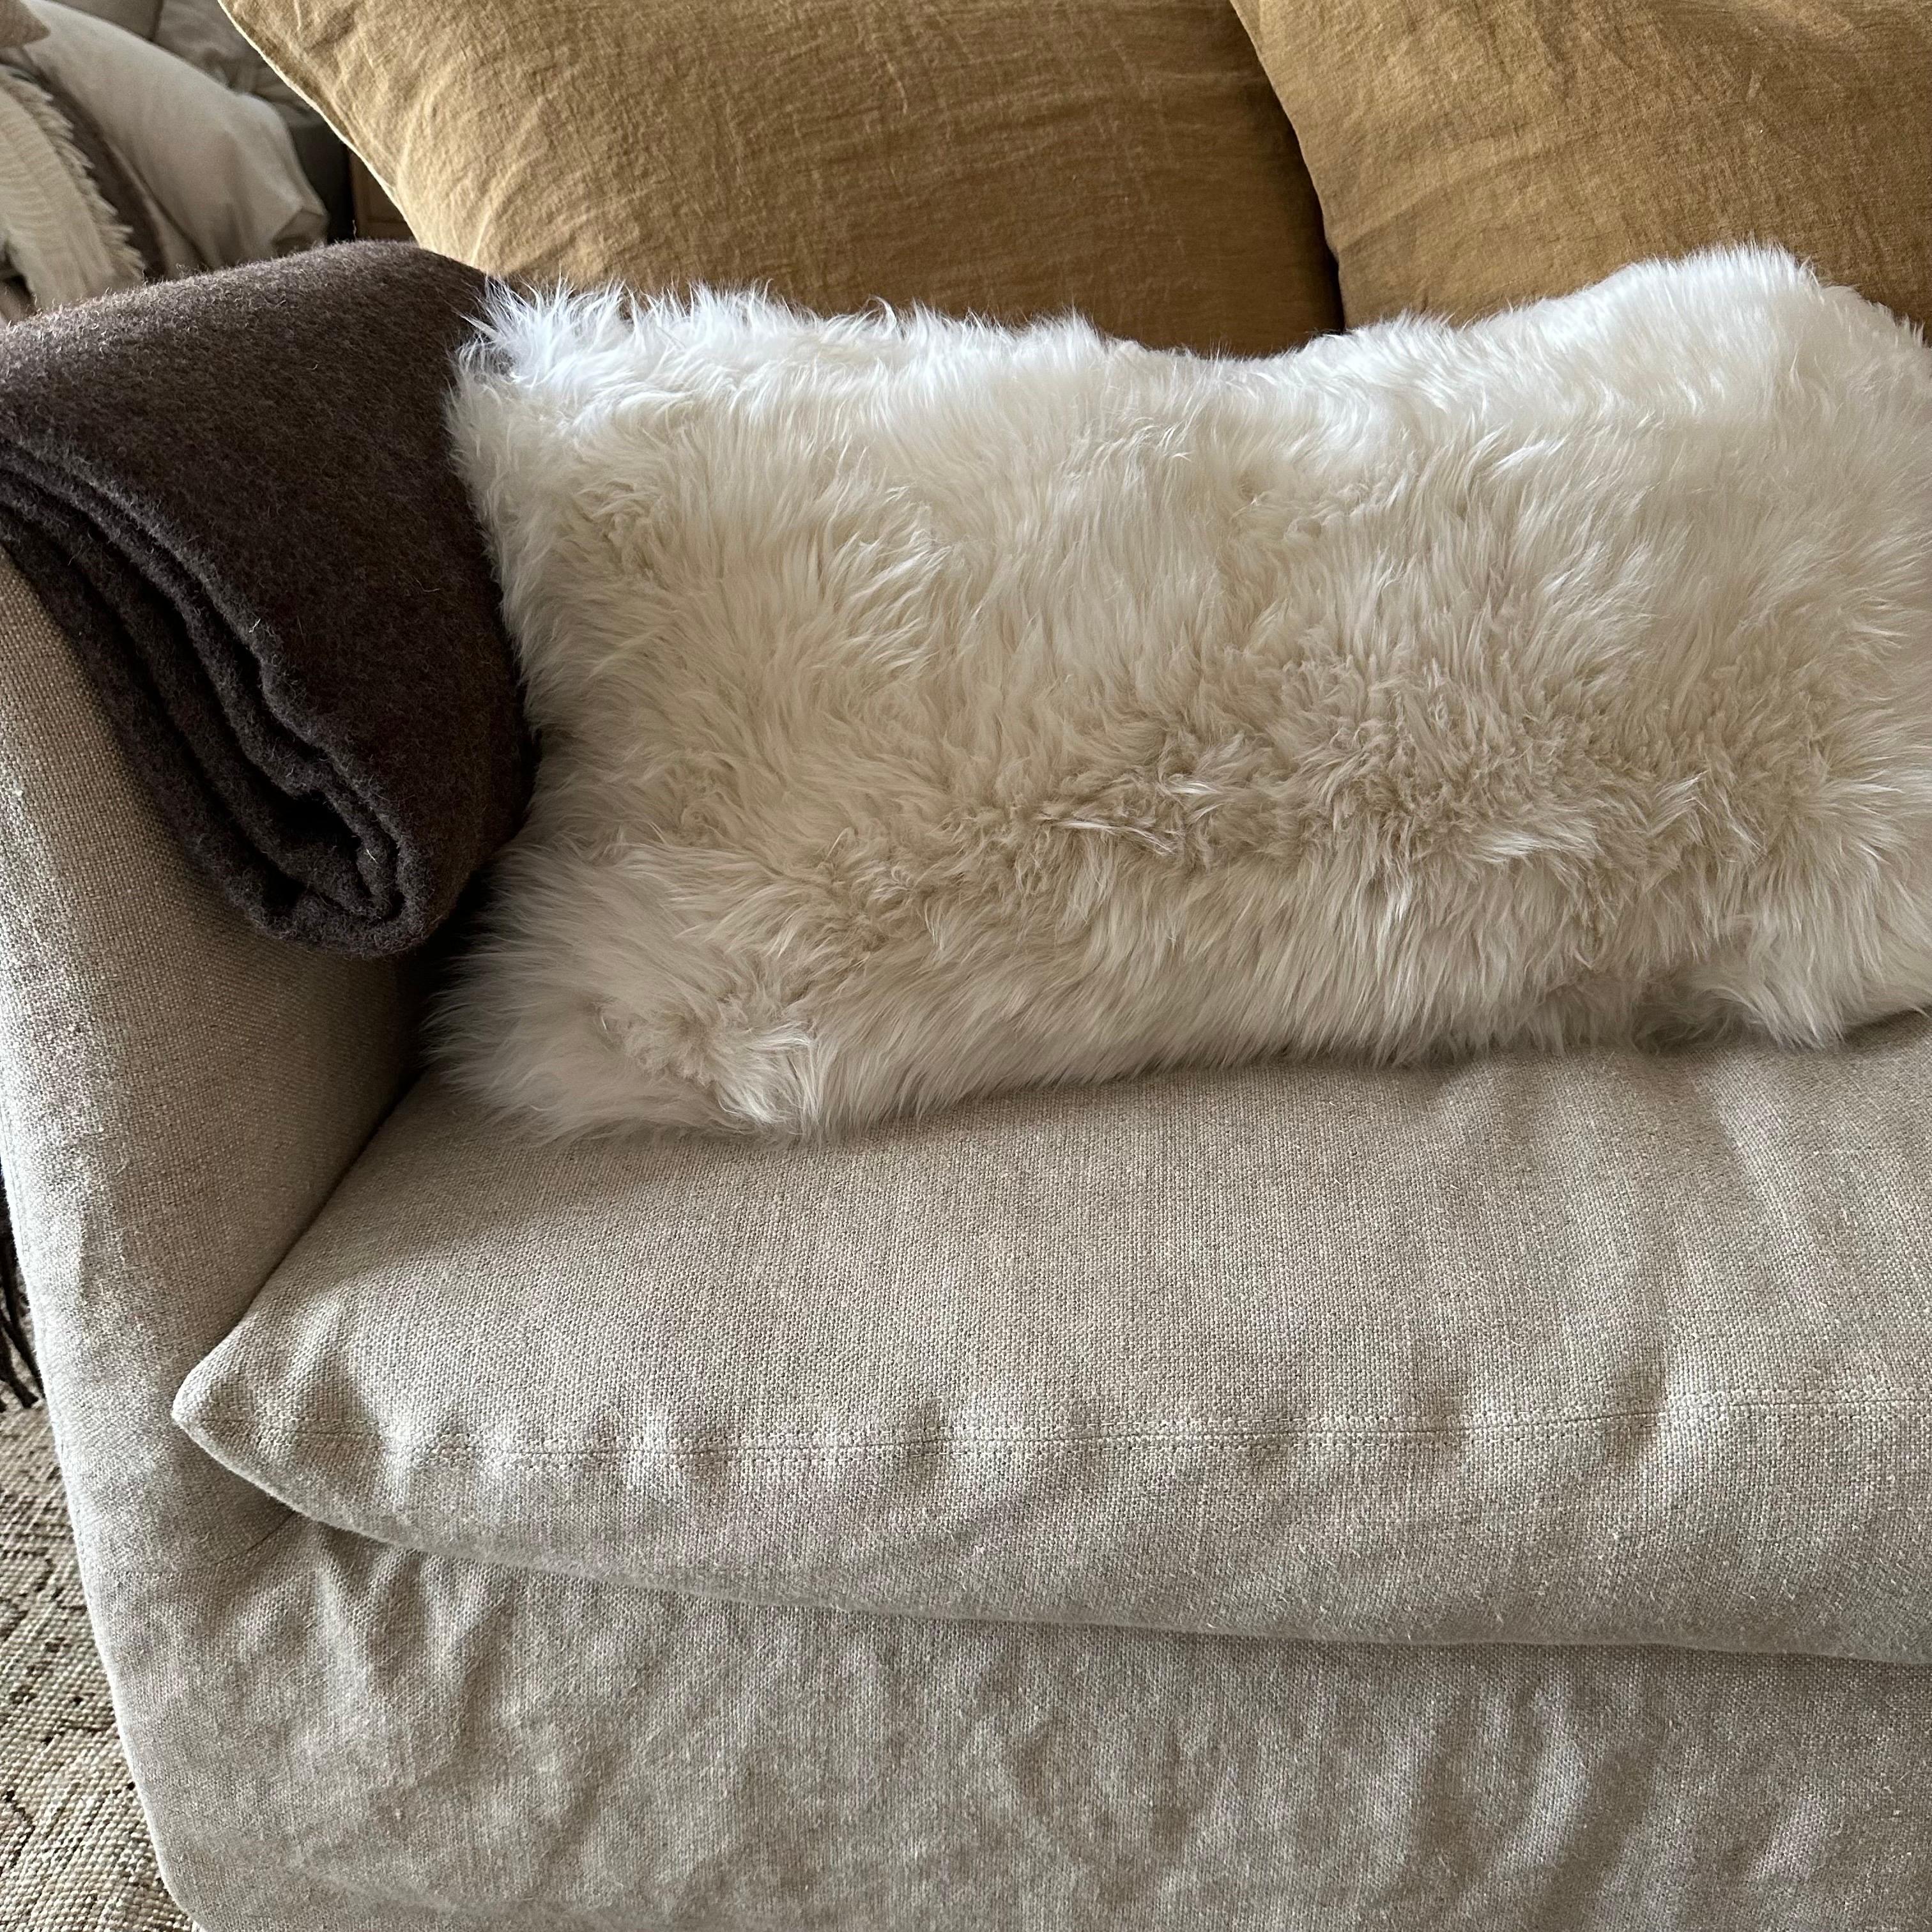 Our sheepskin cushions are made of 100 % sheepskin and are very fashionable. The cushion has an oblong shape which makes it a perfect shape for the couch or the bed. The cushion is made of long wool which gives an extra cozy feel in your